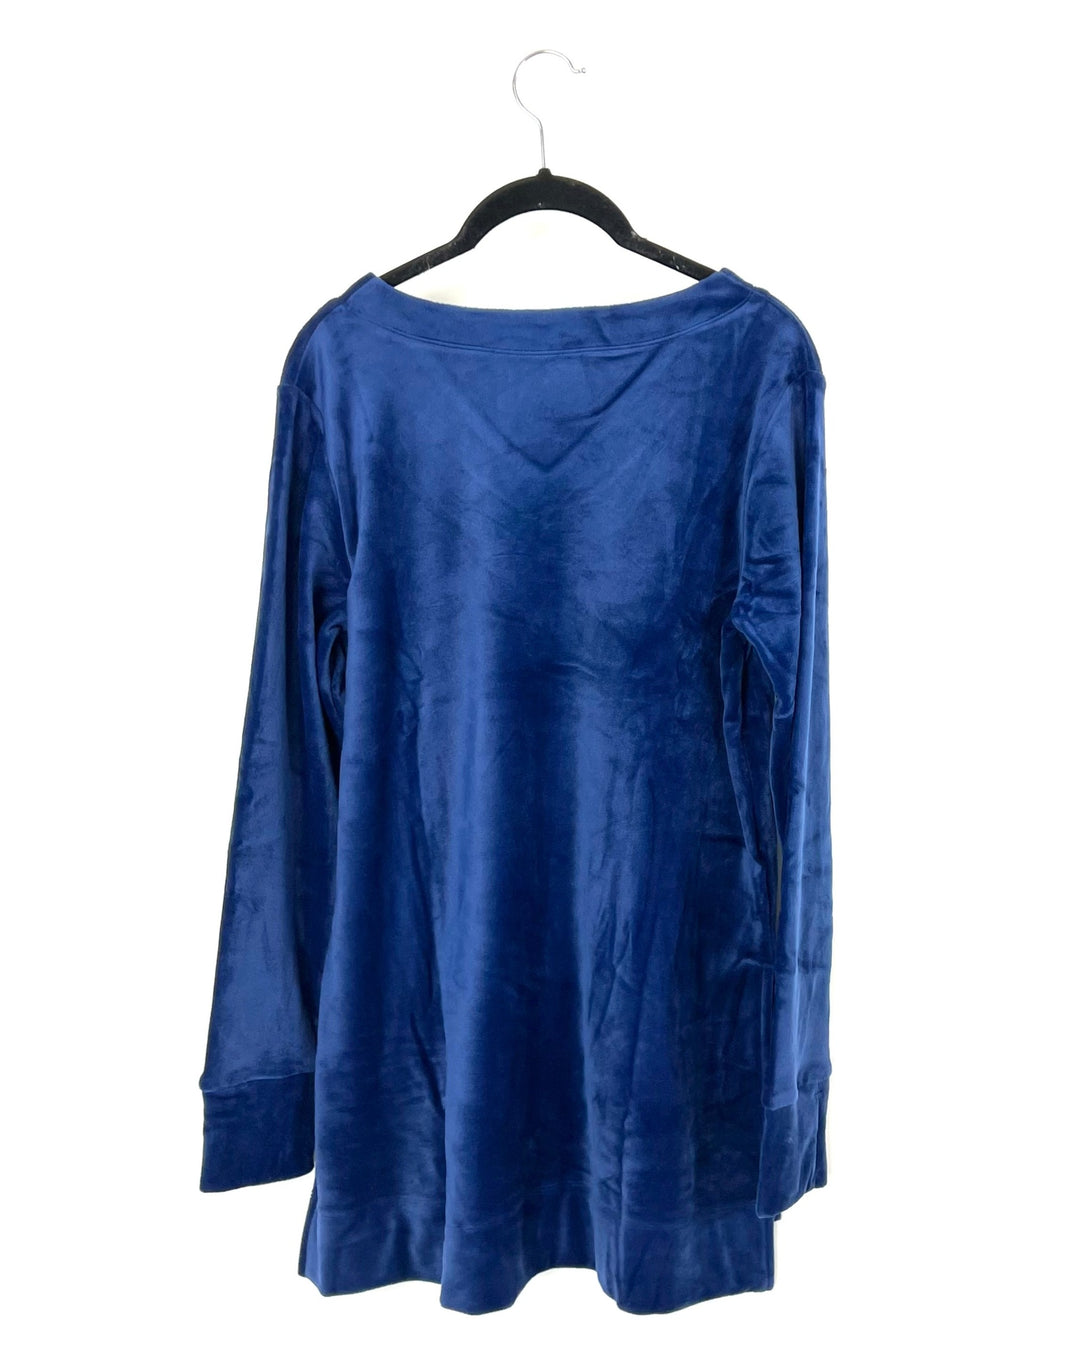 Cozy Blue Long Sleeve Top - Size 2/4, 6/8 and 14/16